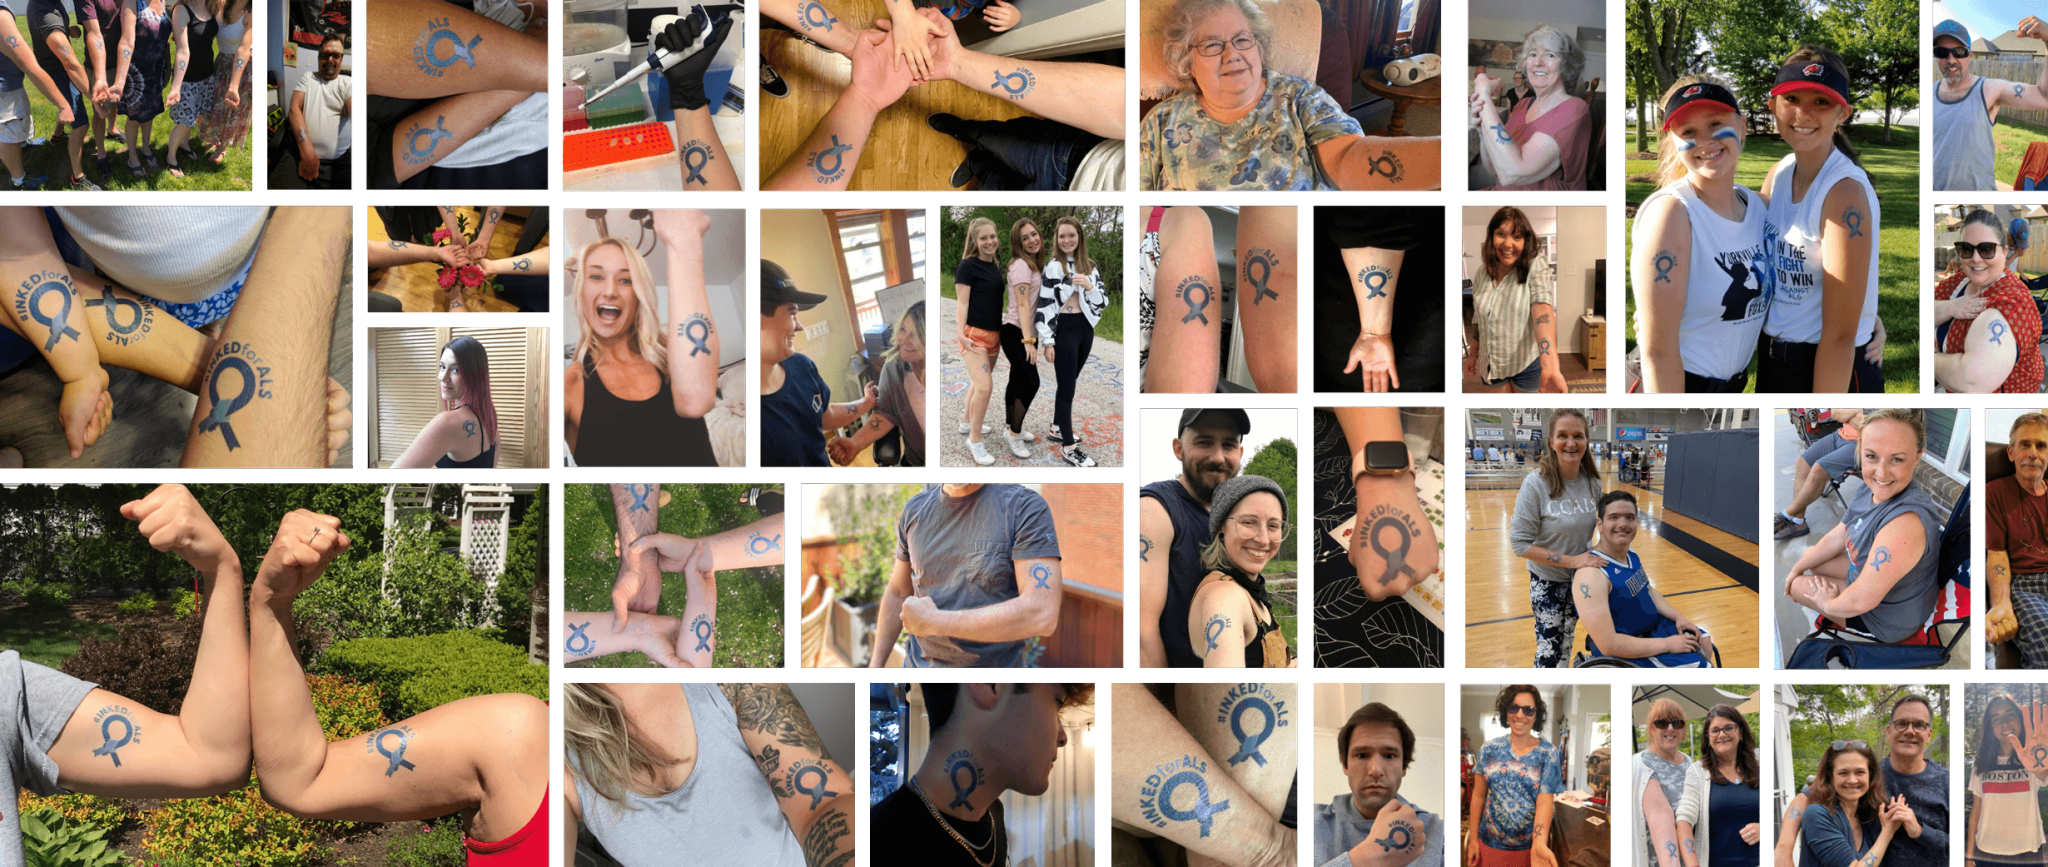 The community has beem making its mark in the fight against ALS by getting #INKEDforALS